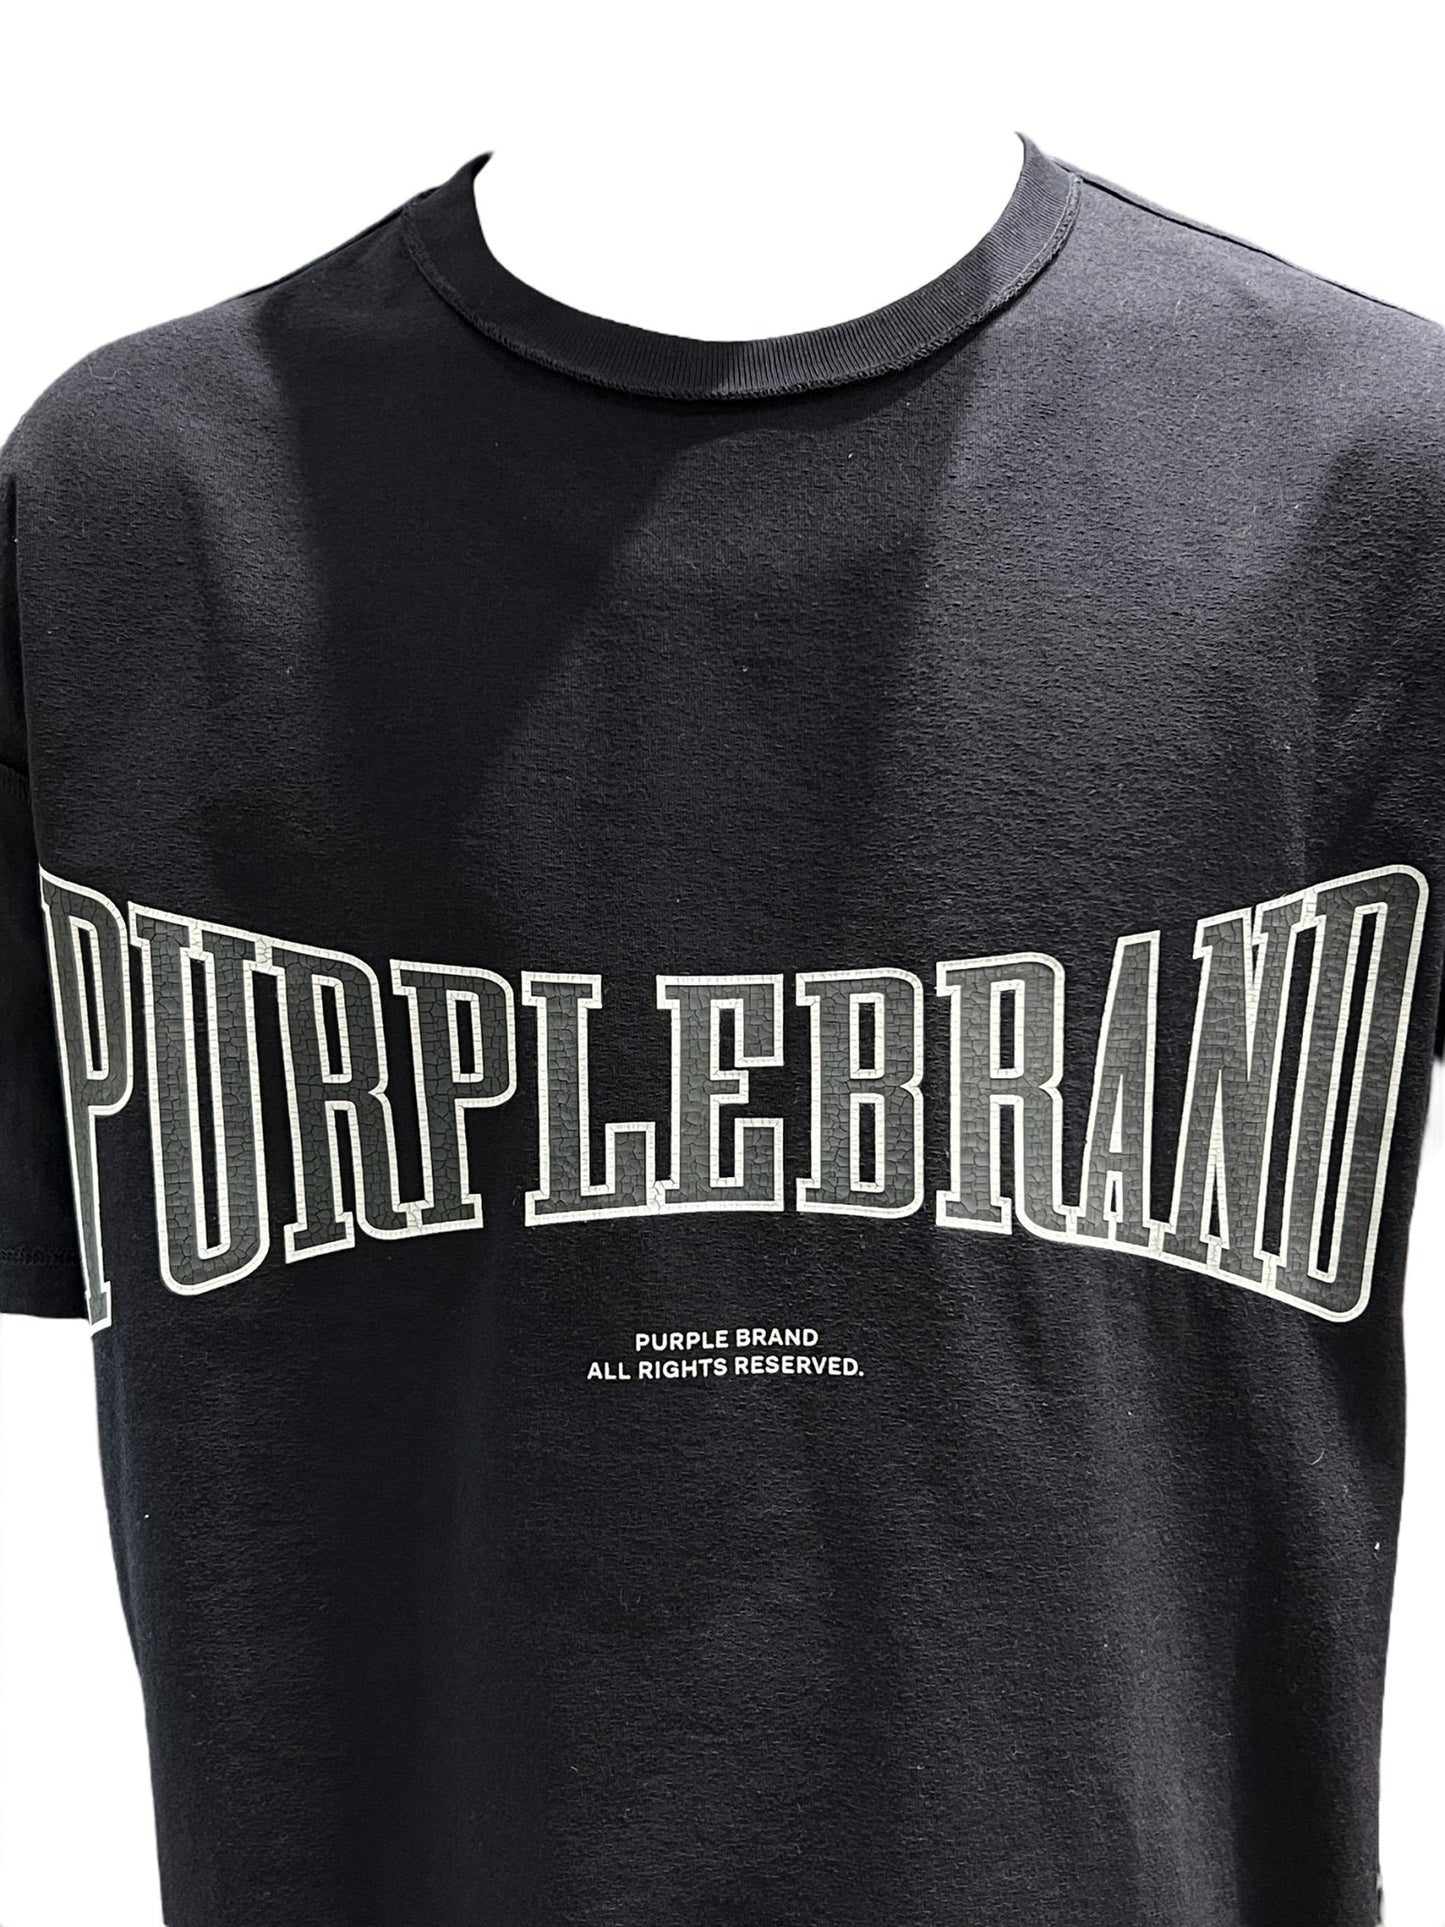 A black cotton PURPLE BRAND P101-JHBB TEXTURED INSIDE OUT TEE with the word "PURPLE BRAND" in a graphic on it.